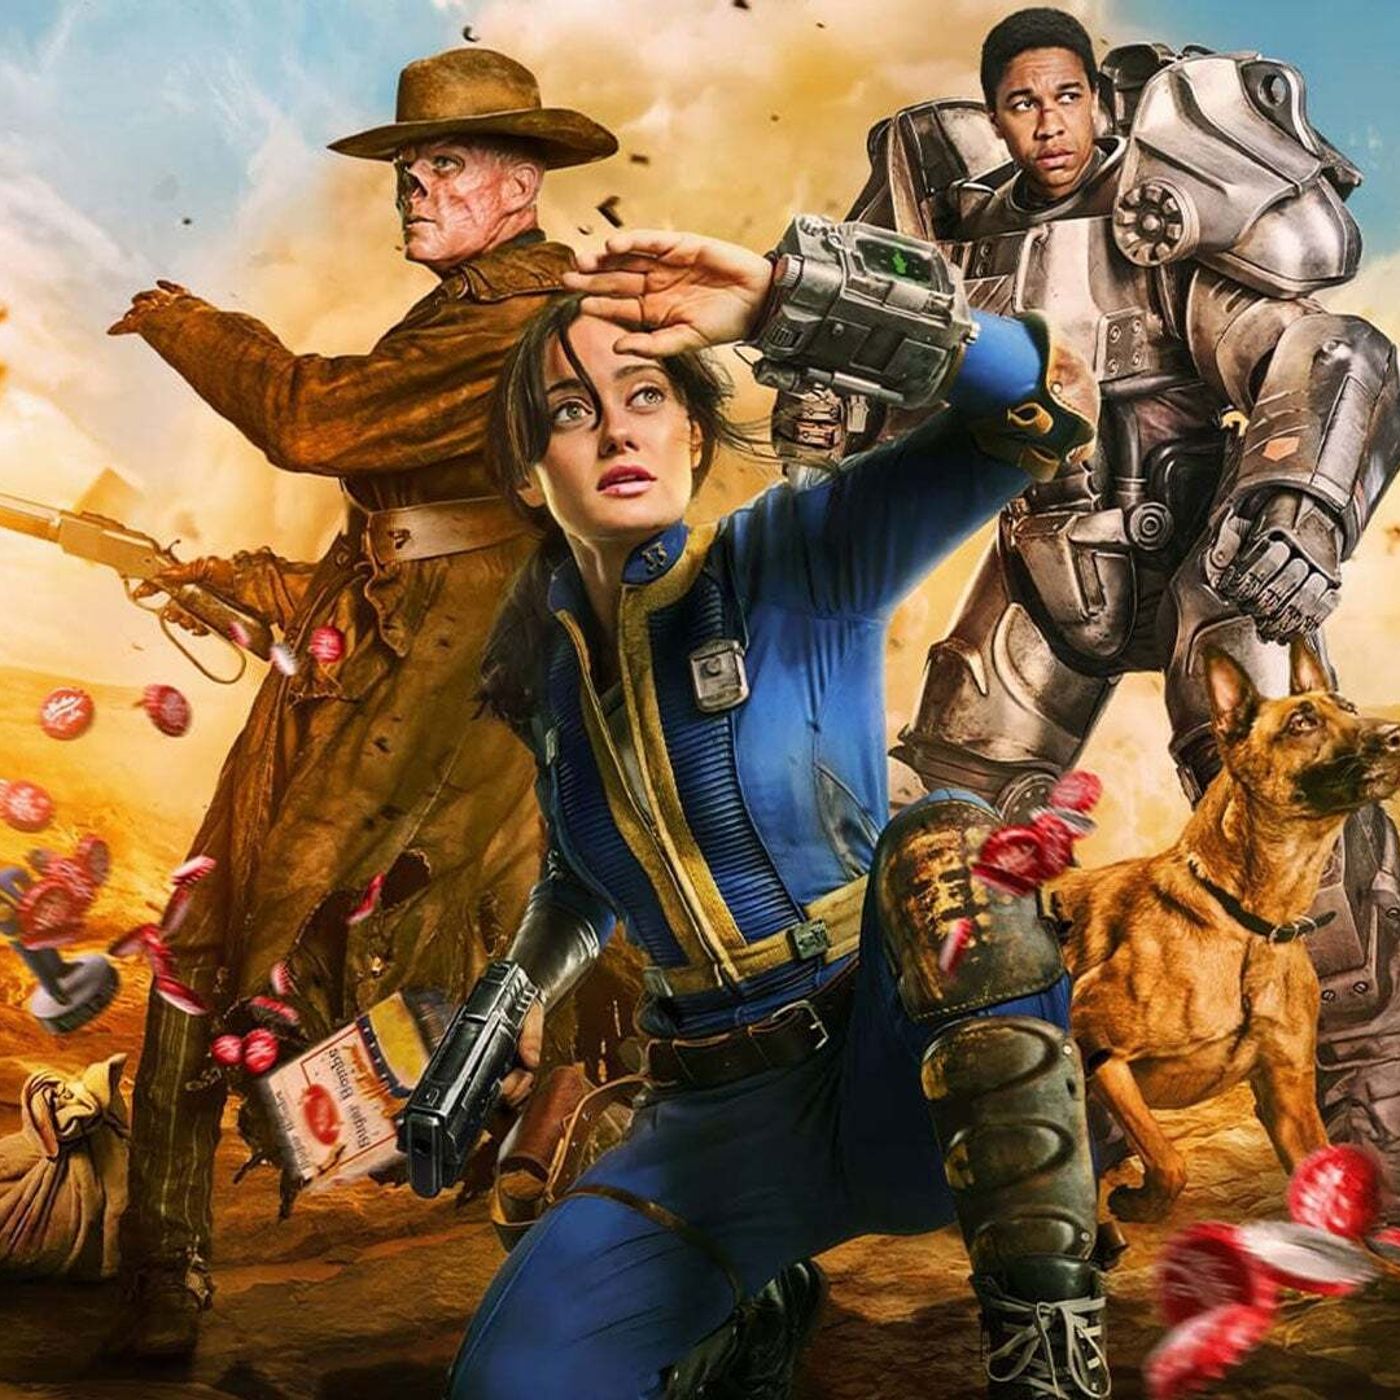 S19 Ep1338: Fallout TV Show is The Best Video Game Adaptation Ever